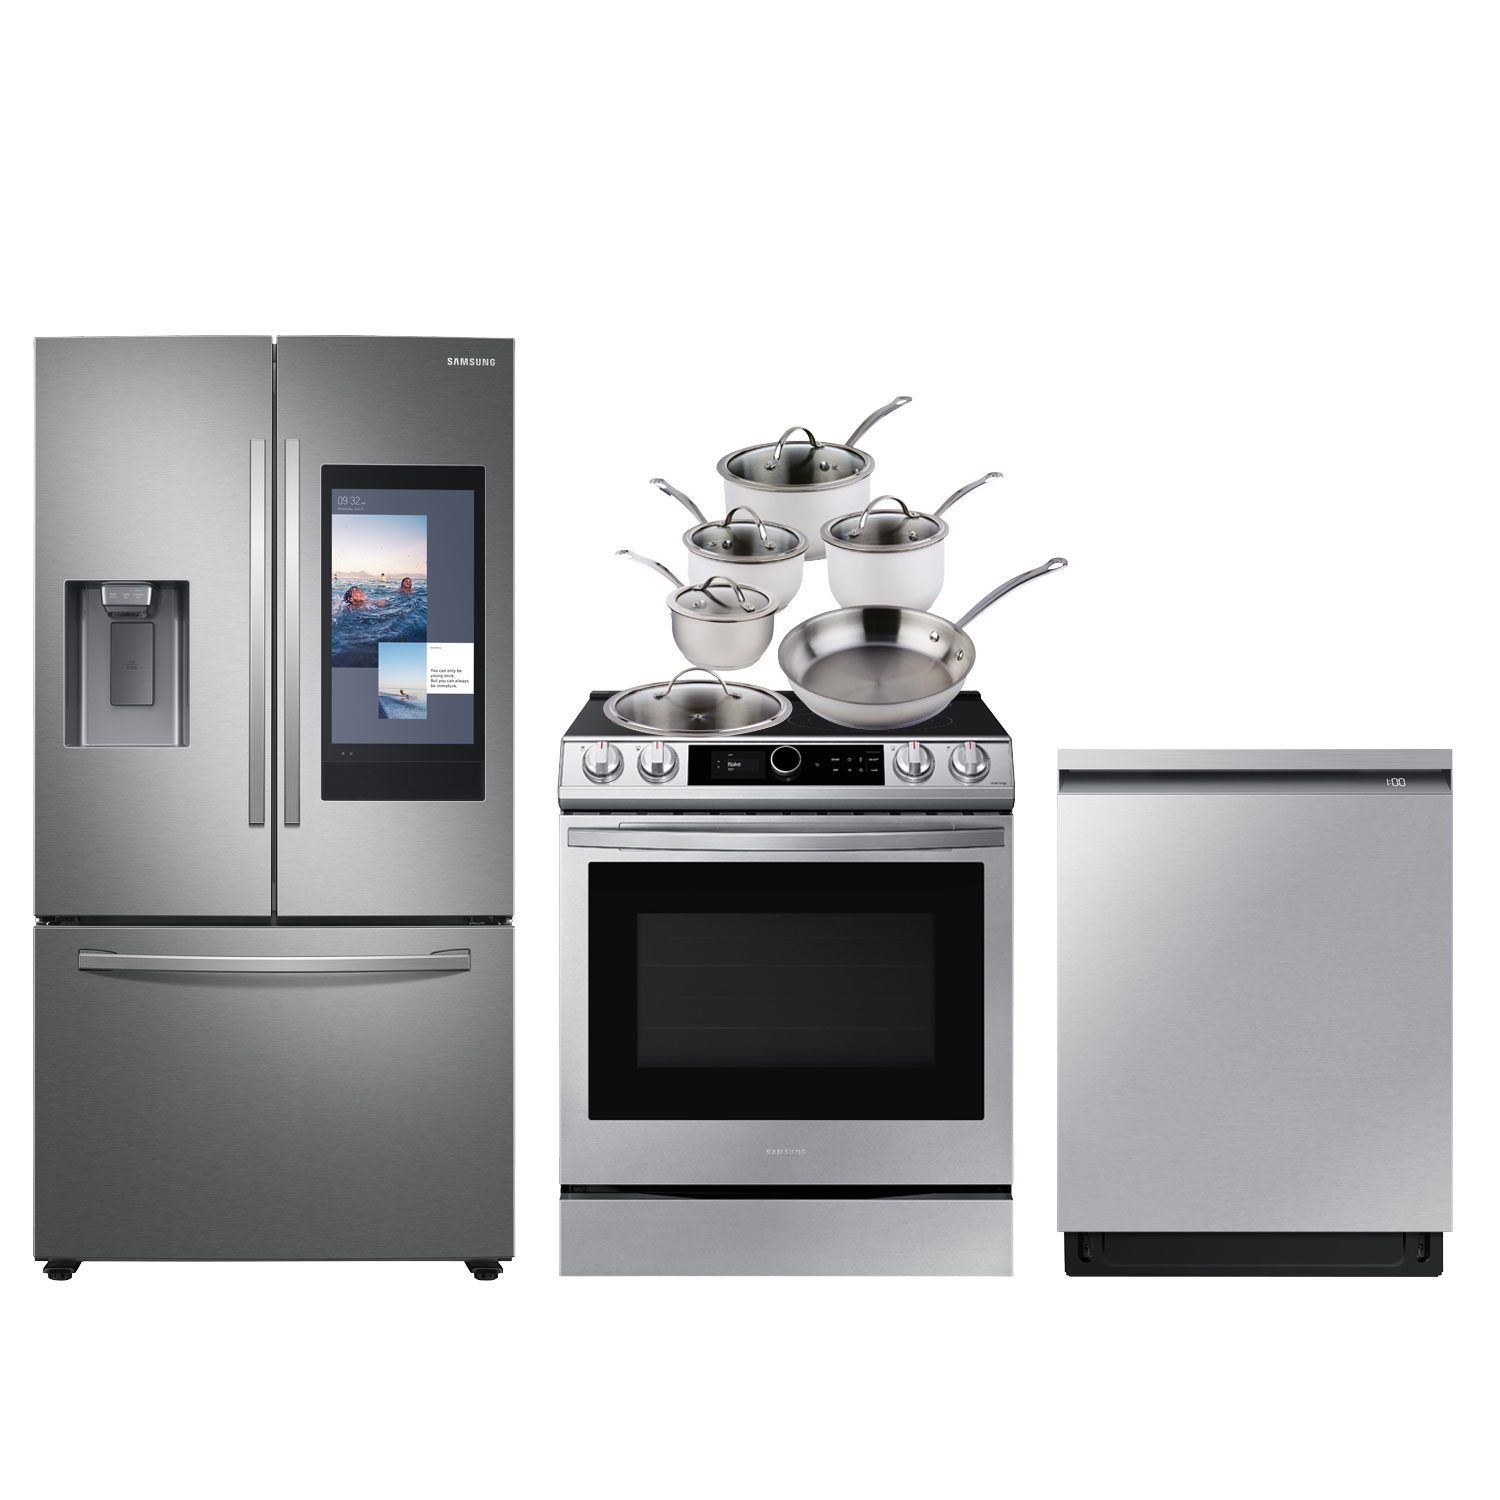 Samsung Family Hub 36" French Door Refrigerator; Electric Range; Dishwasher; Cookware Set - Stainless